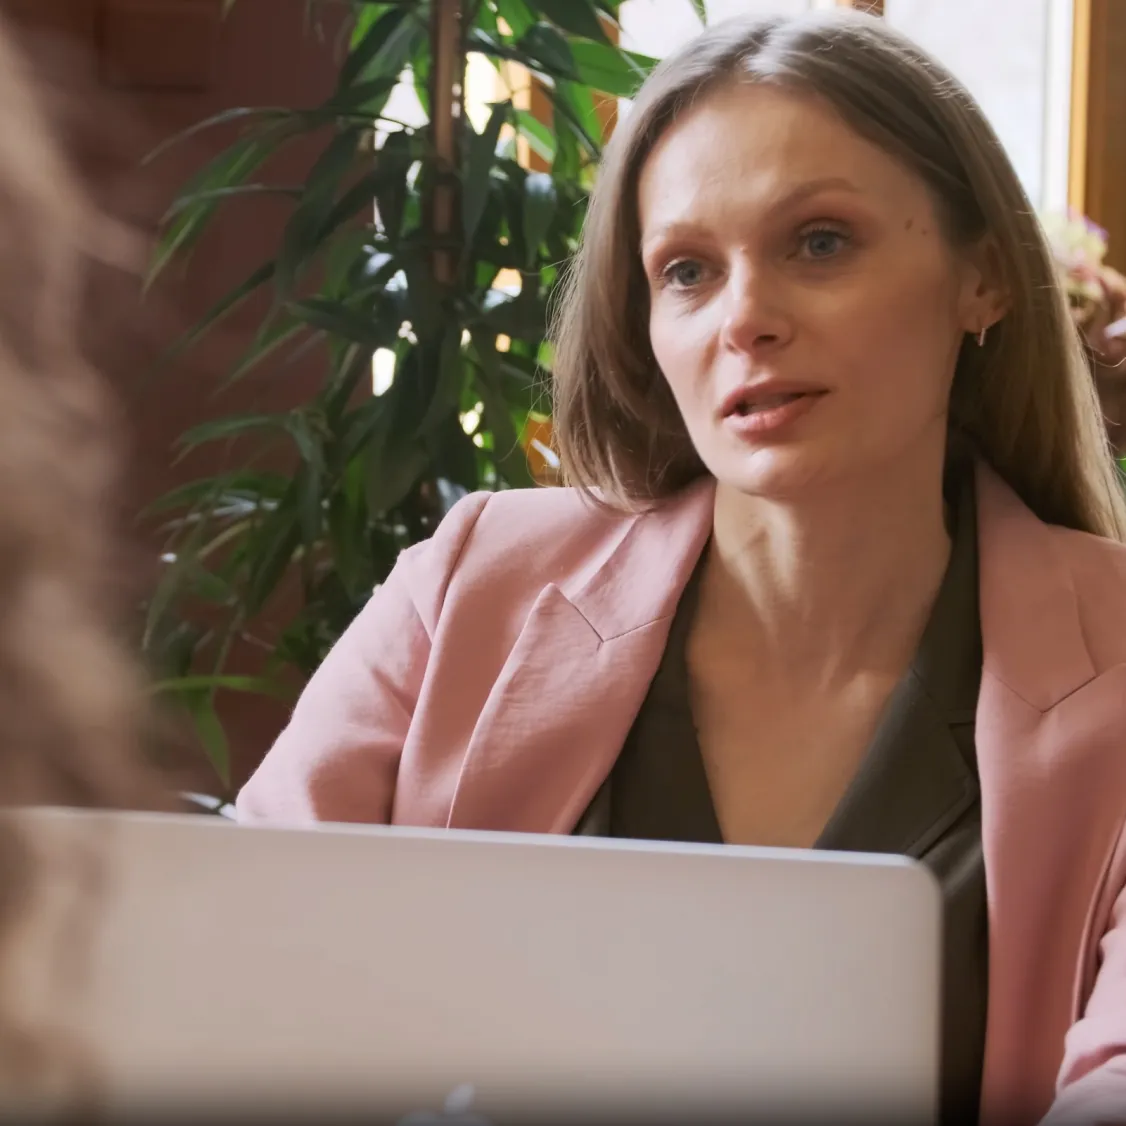 Professional woman in a pink blazer engaged in a serious conversation during a video call with a laptop in front of her.